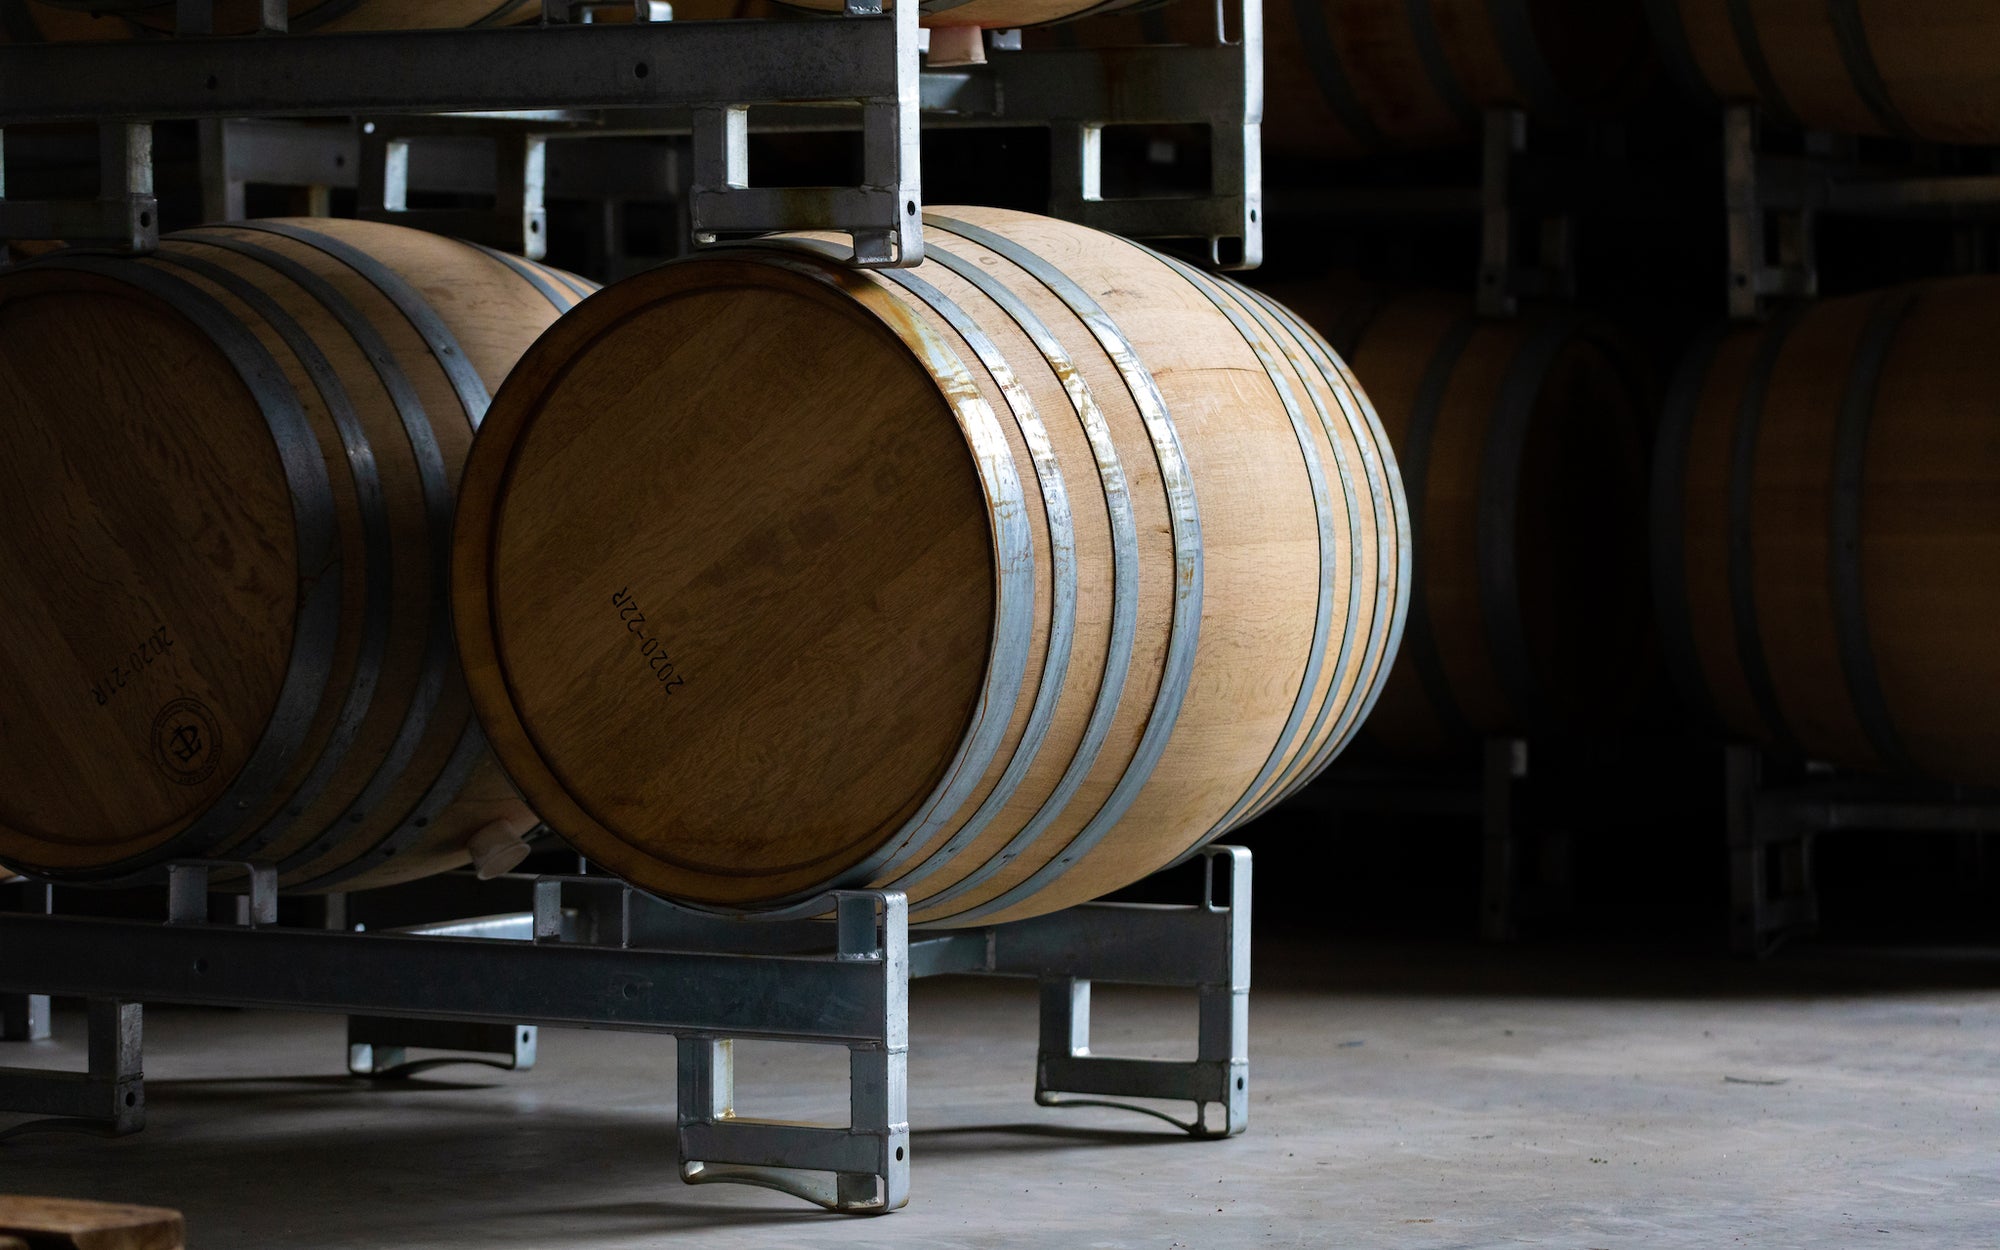 From cask to glass: all about our wine barrels